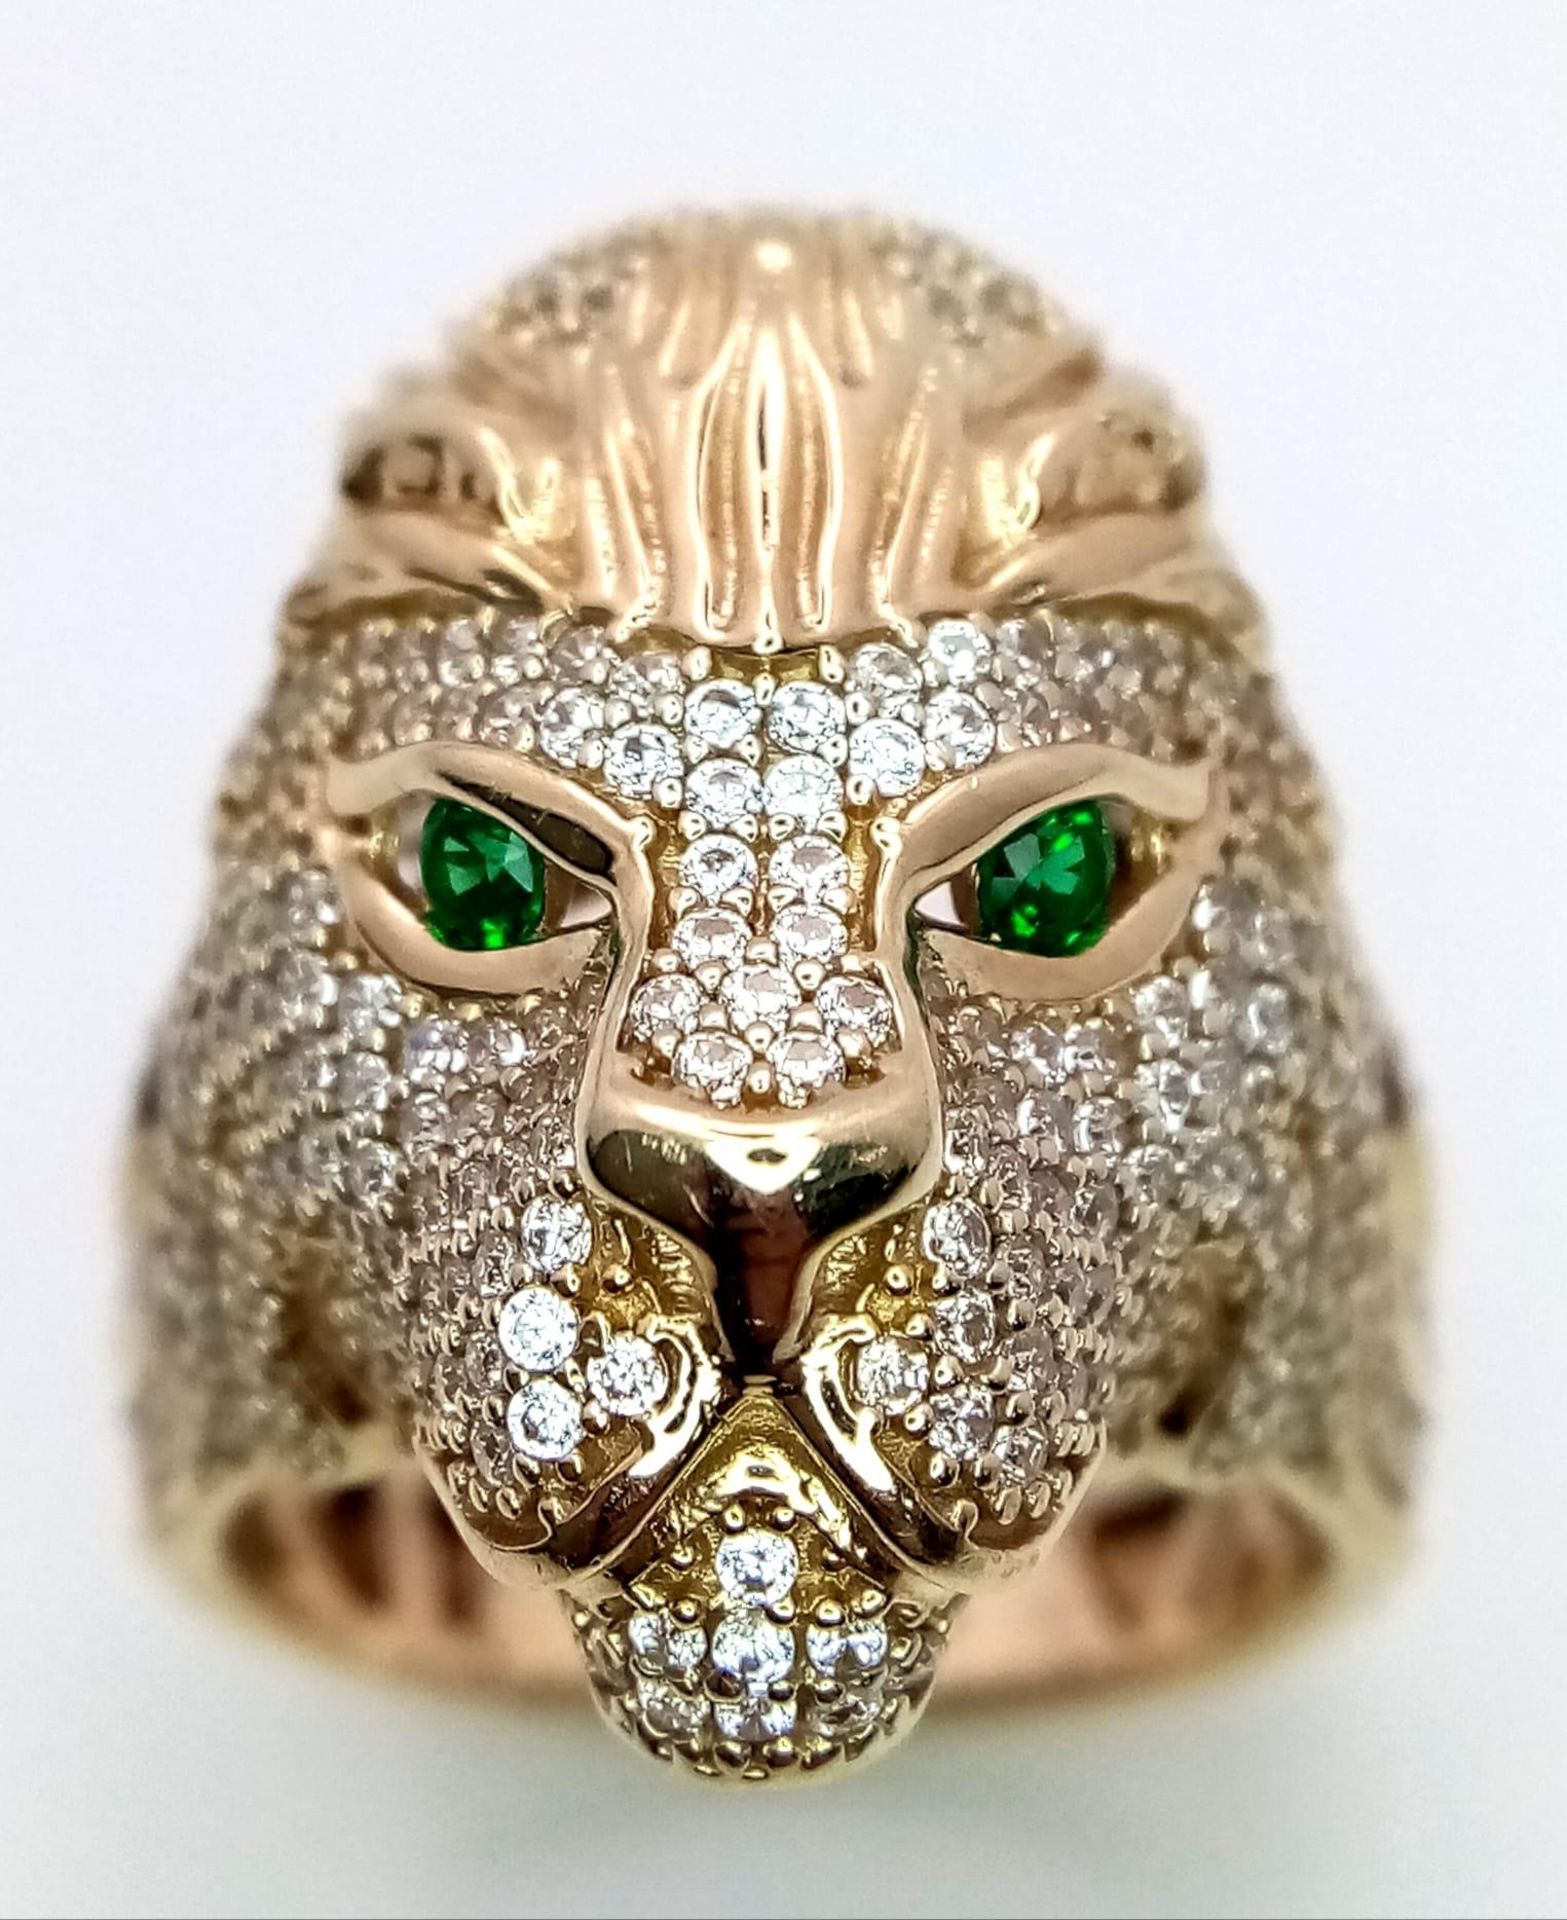 A 9K YELLOW GOLD STONE SET LIONS HEAD RING. 11.5G. SIZE T